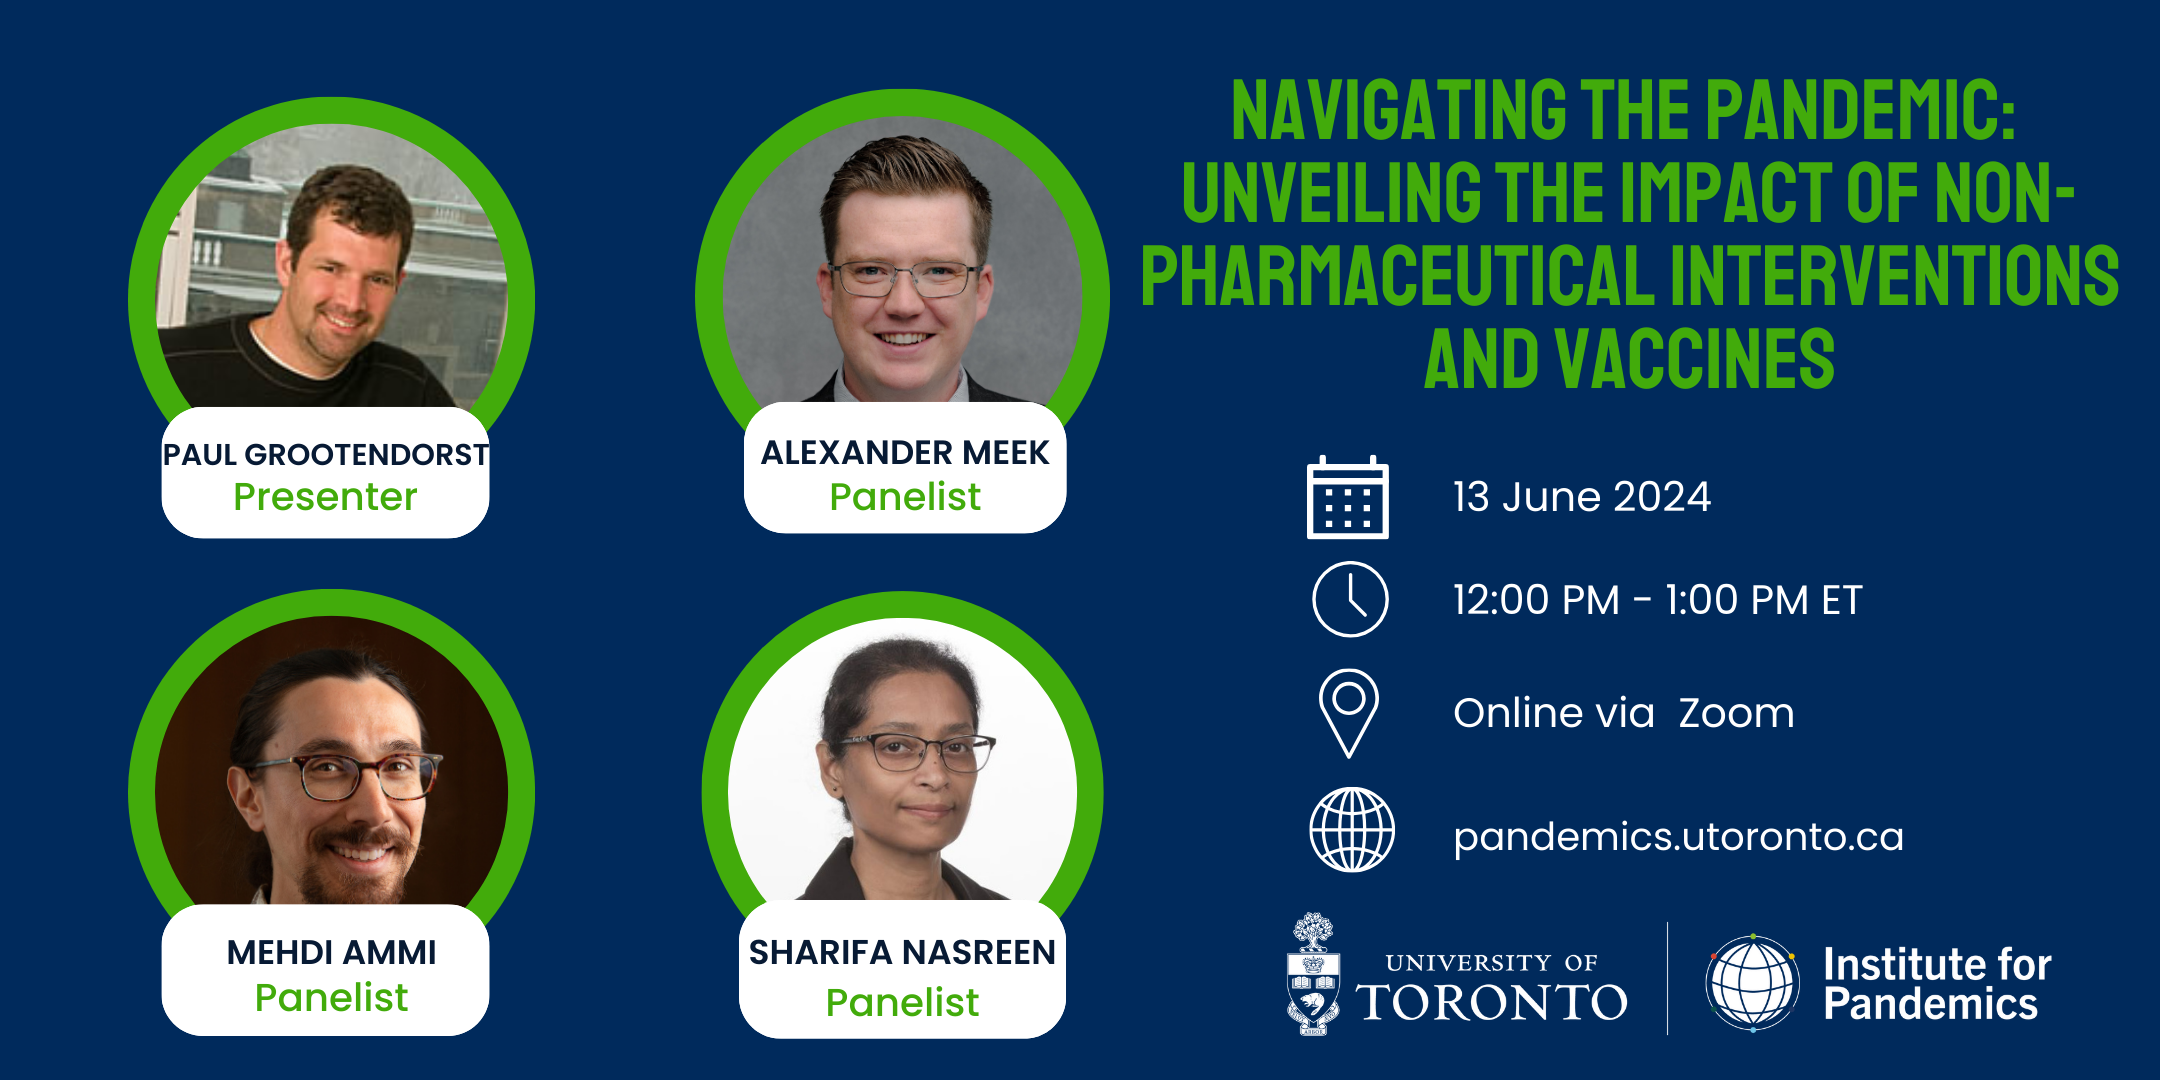 Graphic with event details and headshots of the speakers for "Navigating the Pandemic: Unveiling the Impact of Non-Pharmaceutical Interventions and Vaccines"